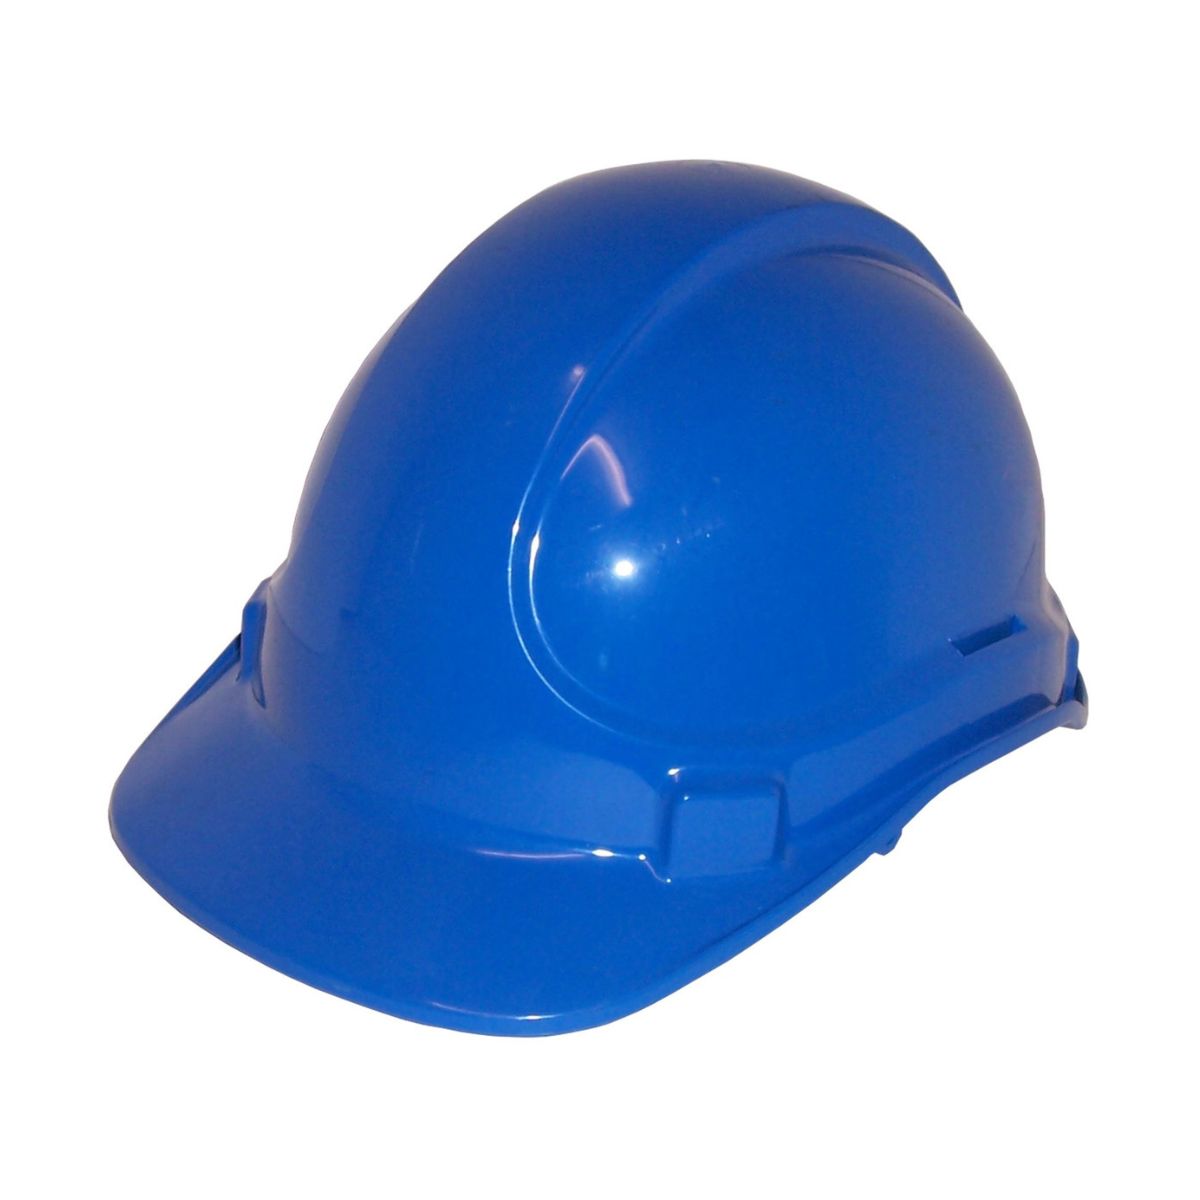 Hard Hat Accessories: What Can You Wear Pro Choice Safety Gear